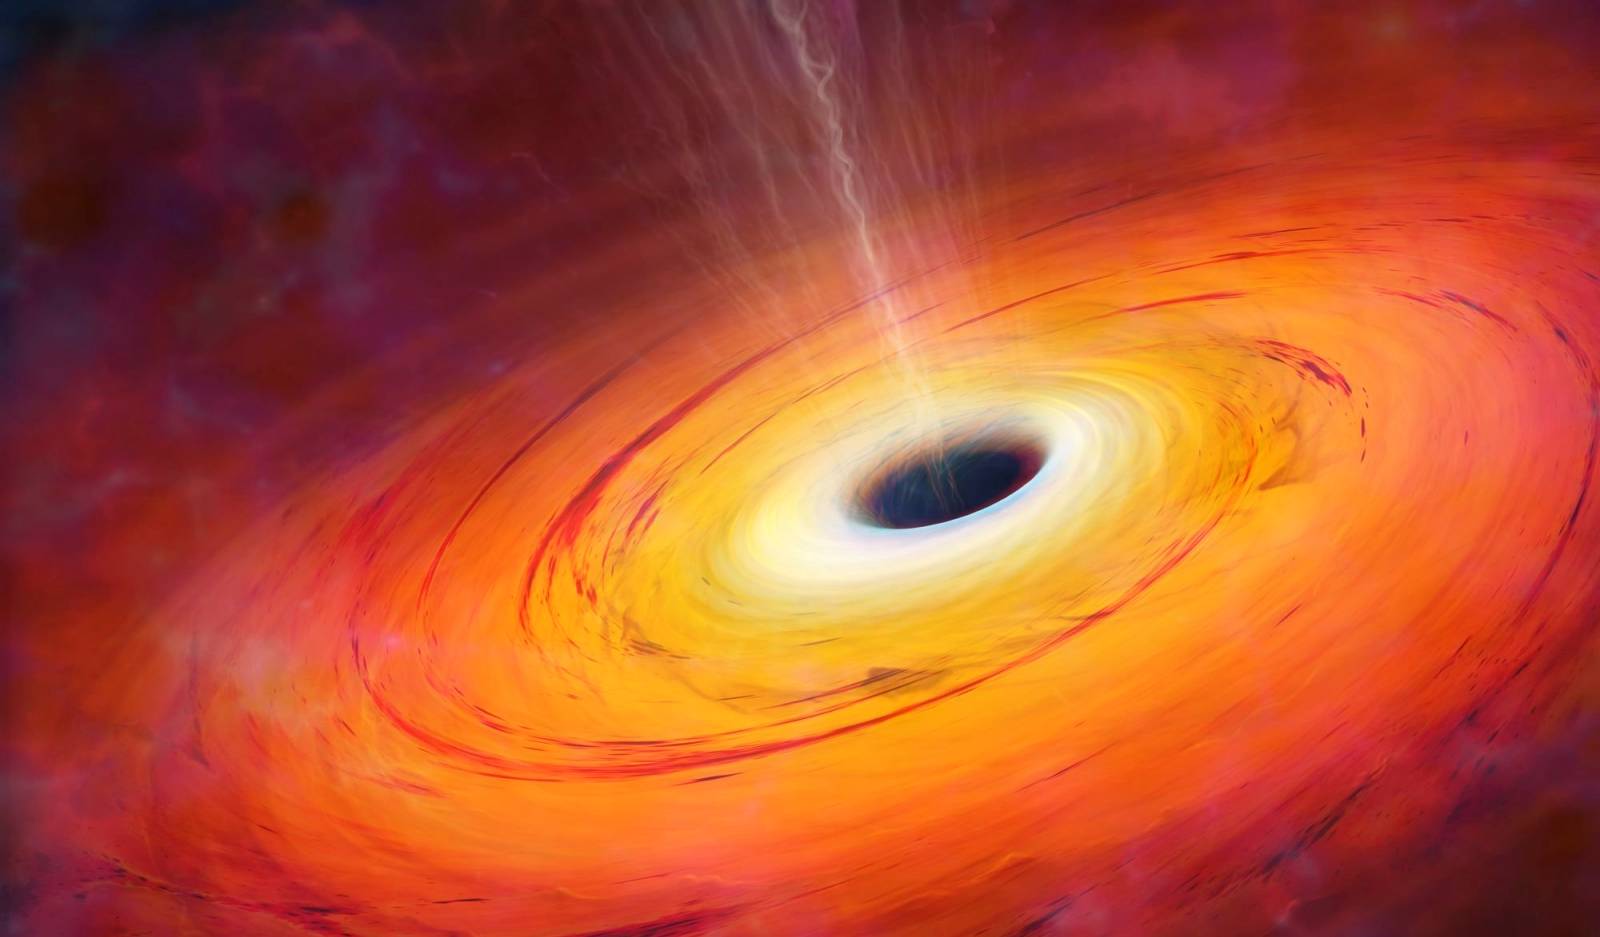 The black hole ejects